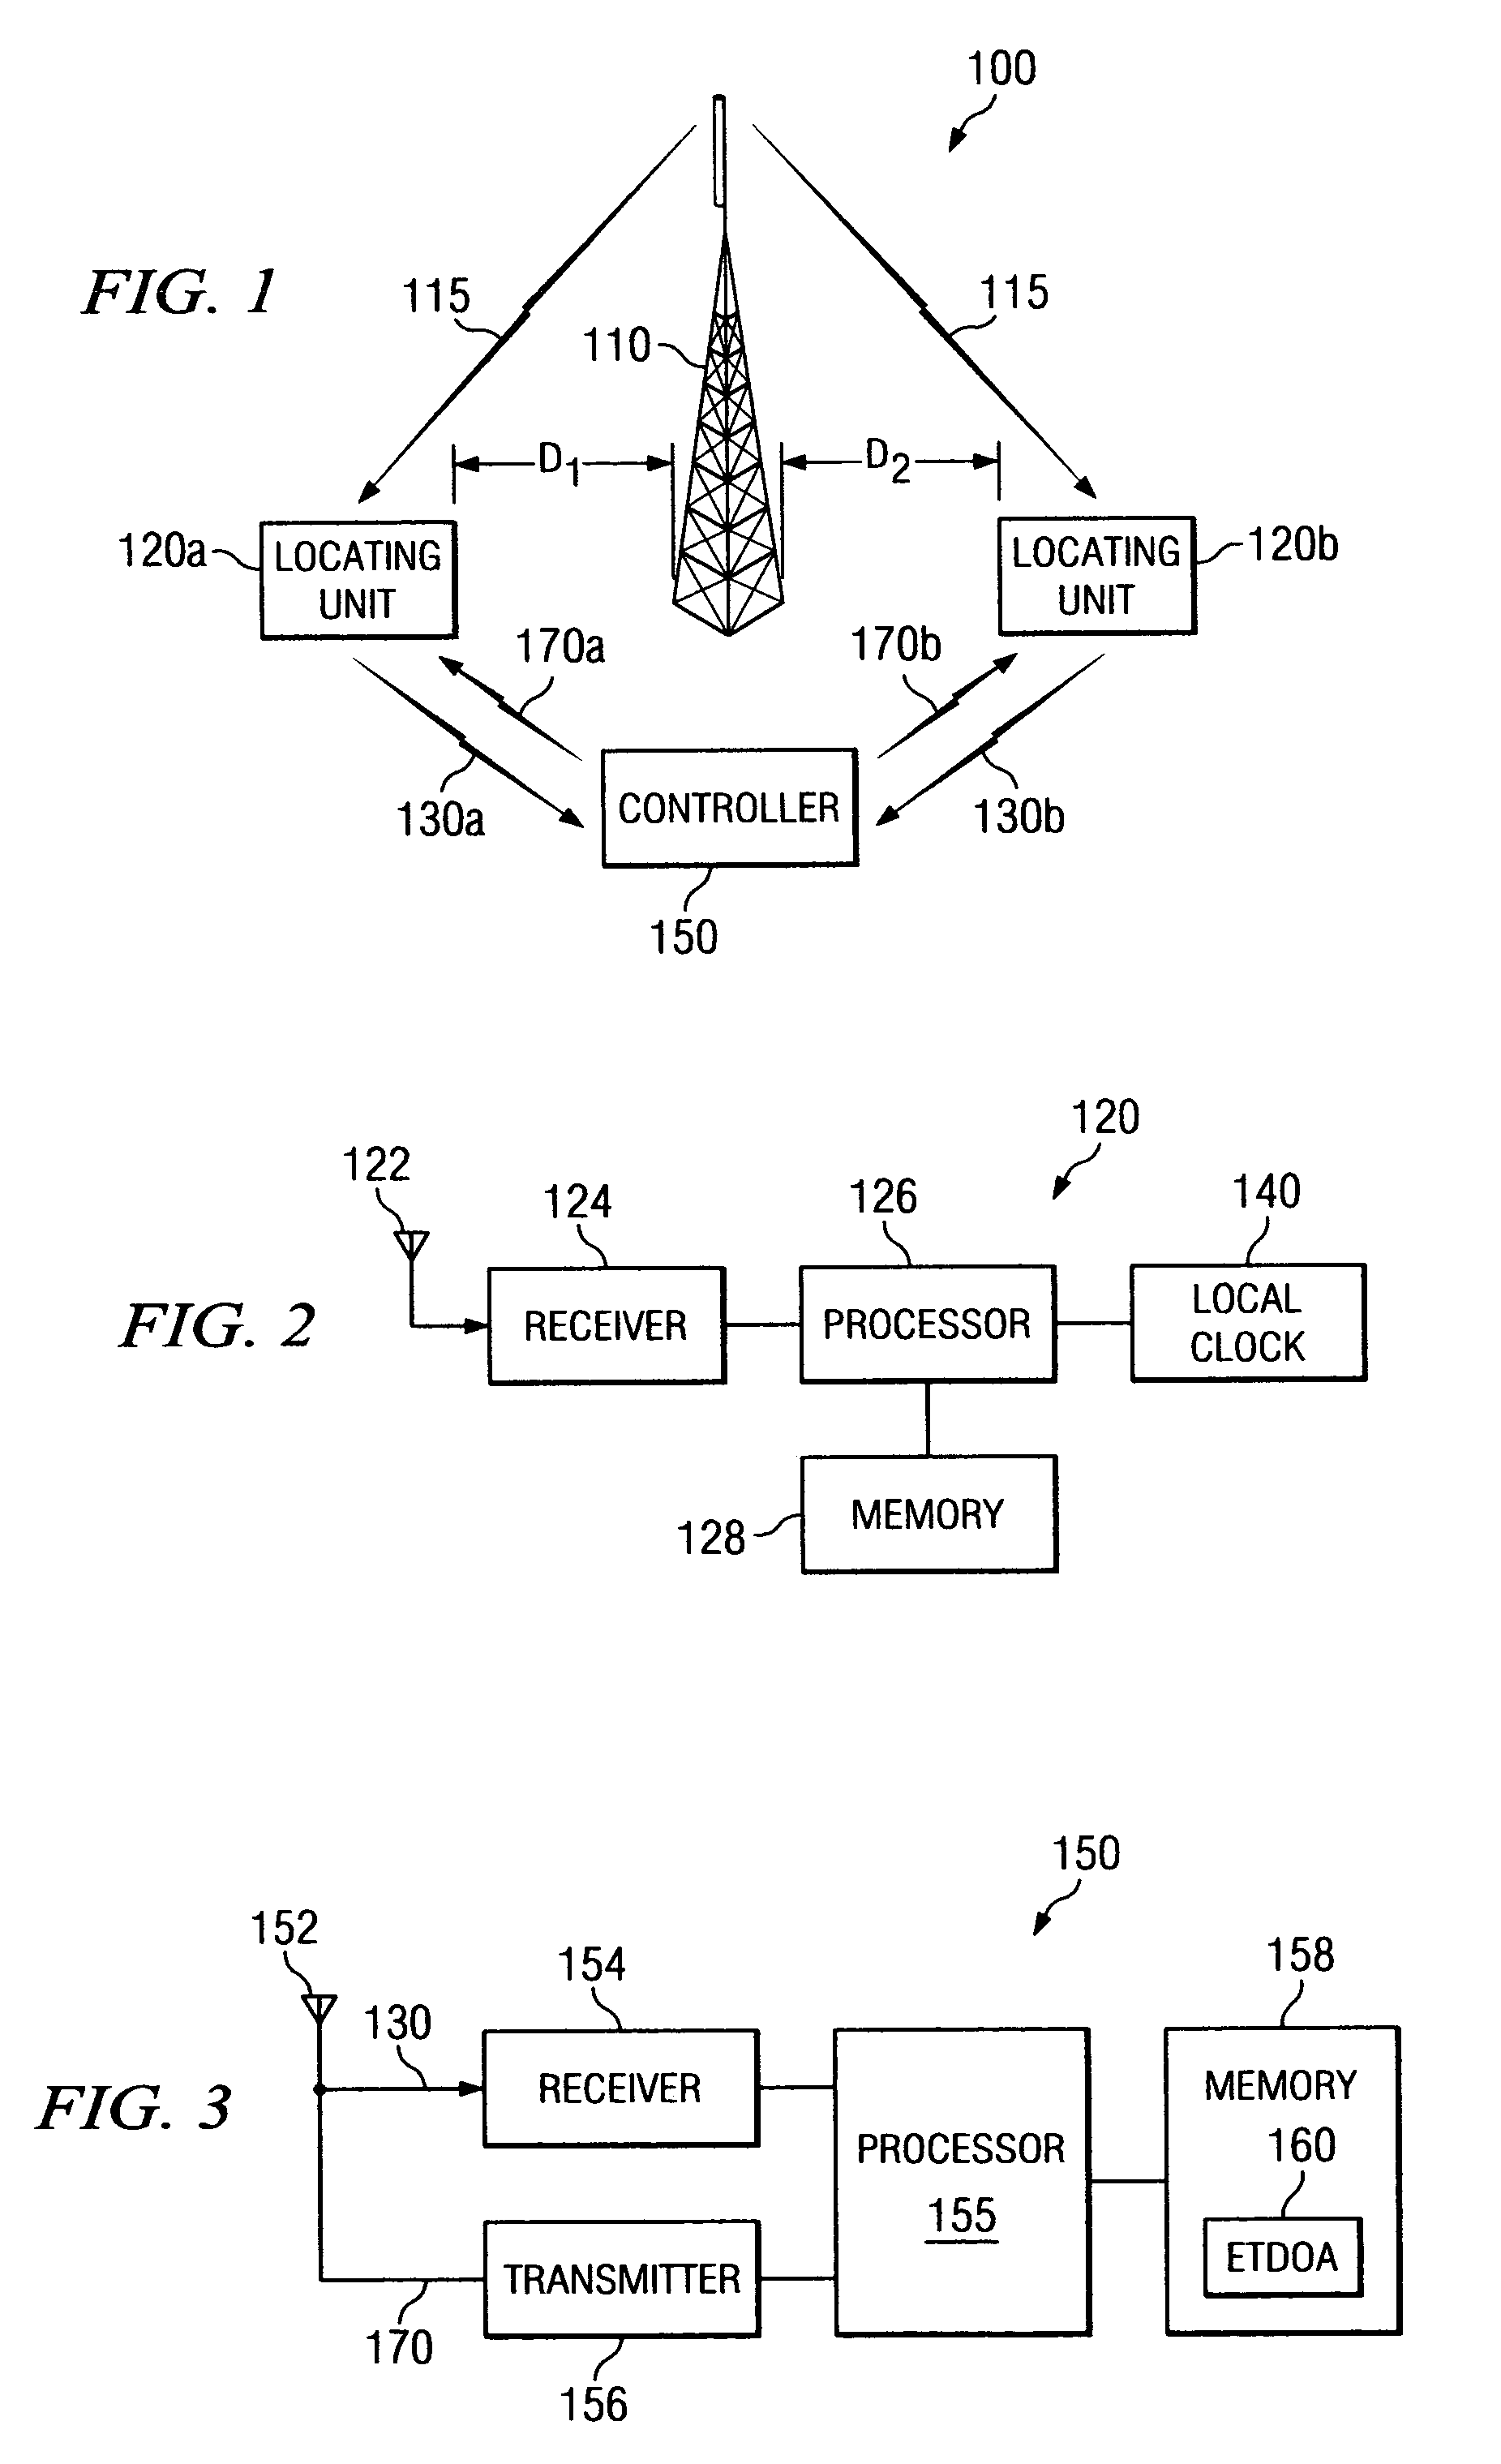 Time synchronization system and method for synchronizing locating units within a communication system using a known external signal